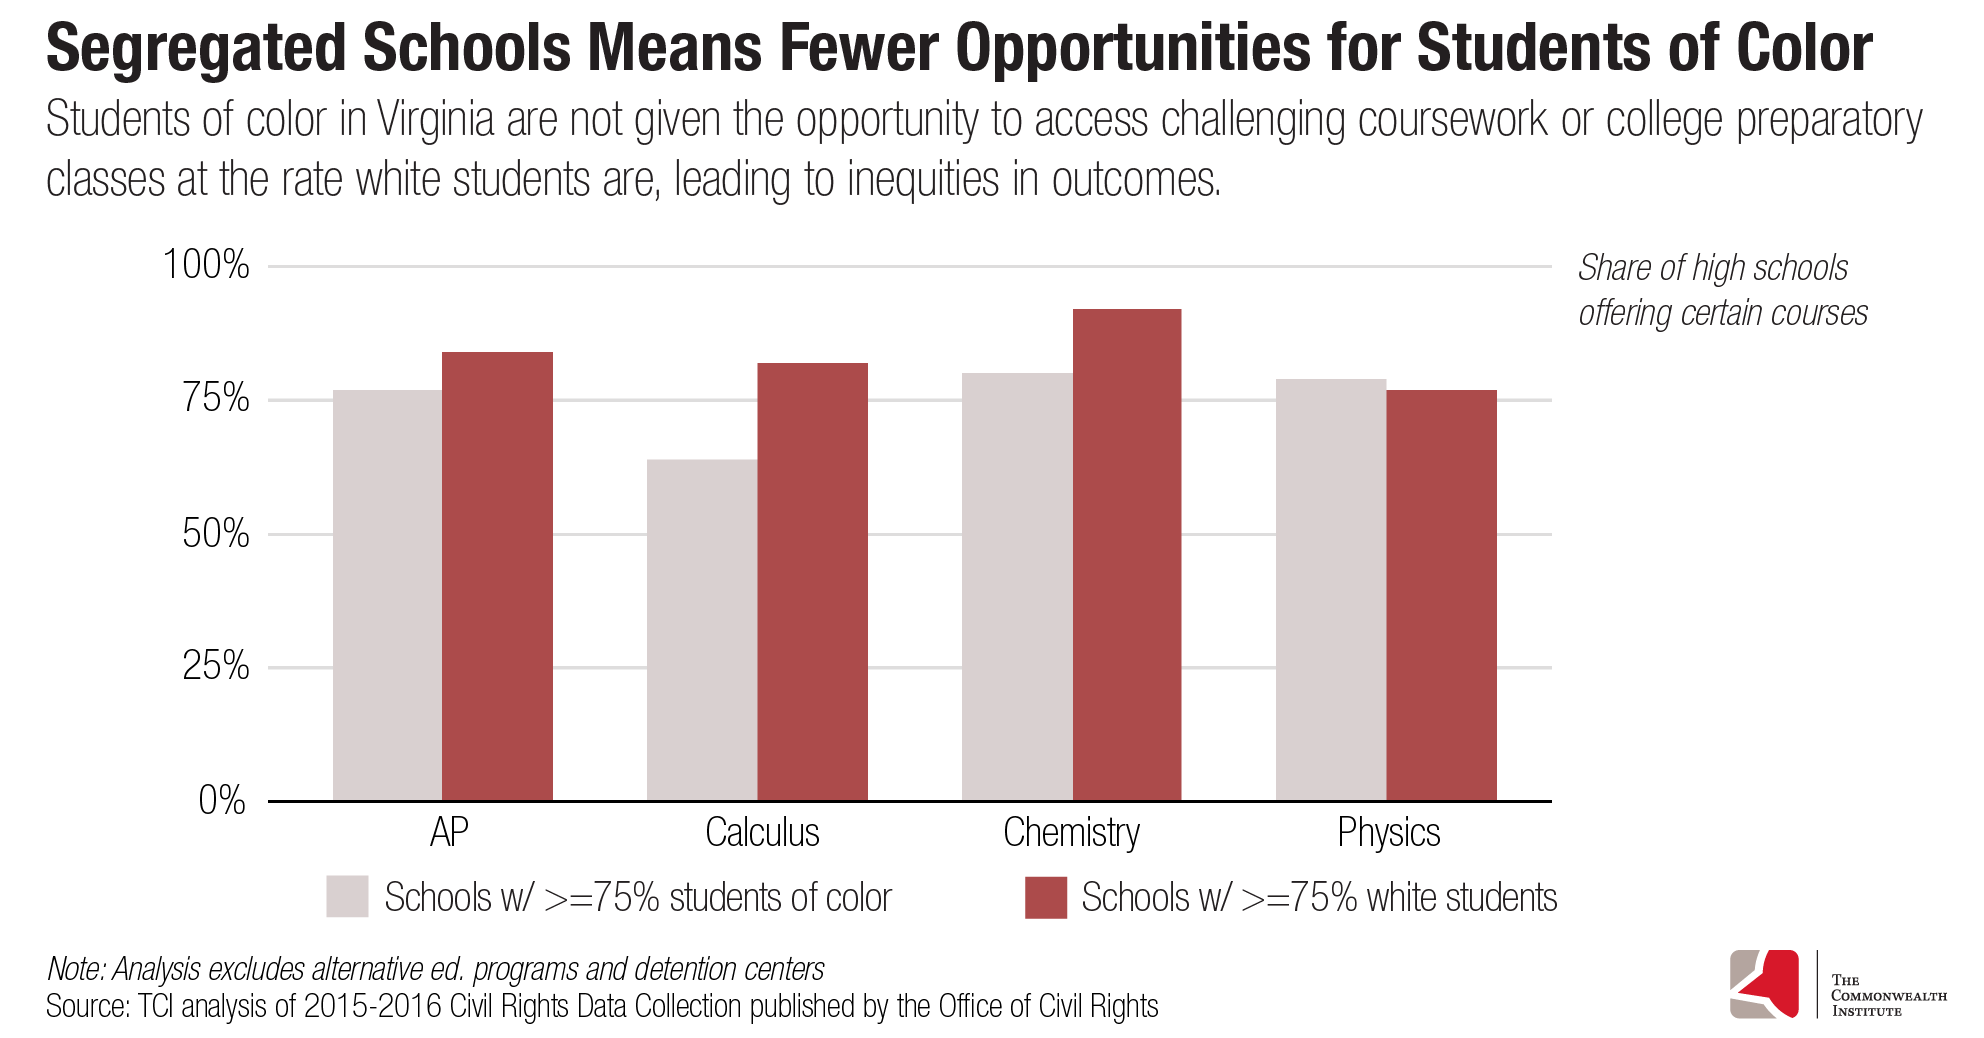 Bar graph showing that students in schools with more than 75% students of color have less access to challenging coursework or college prep classes